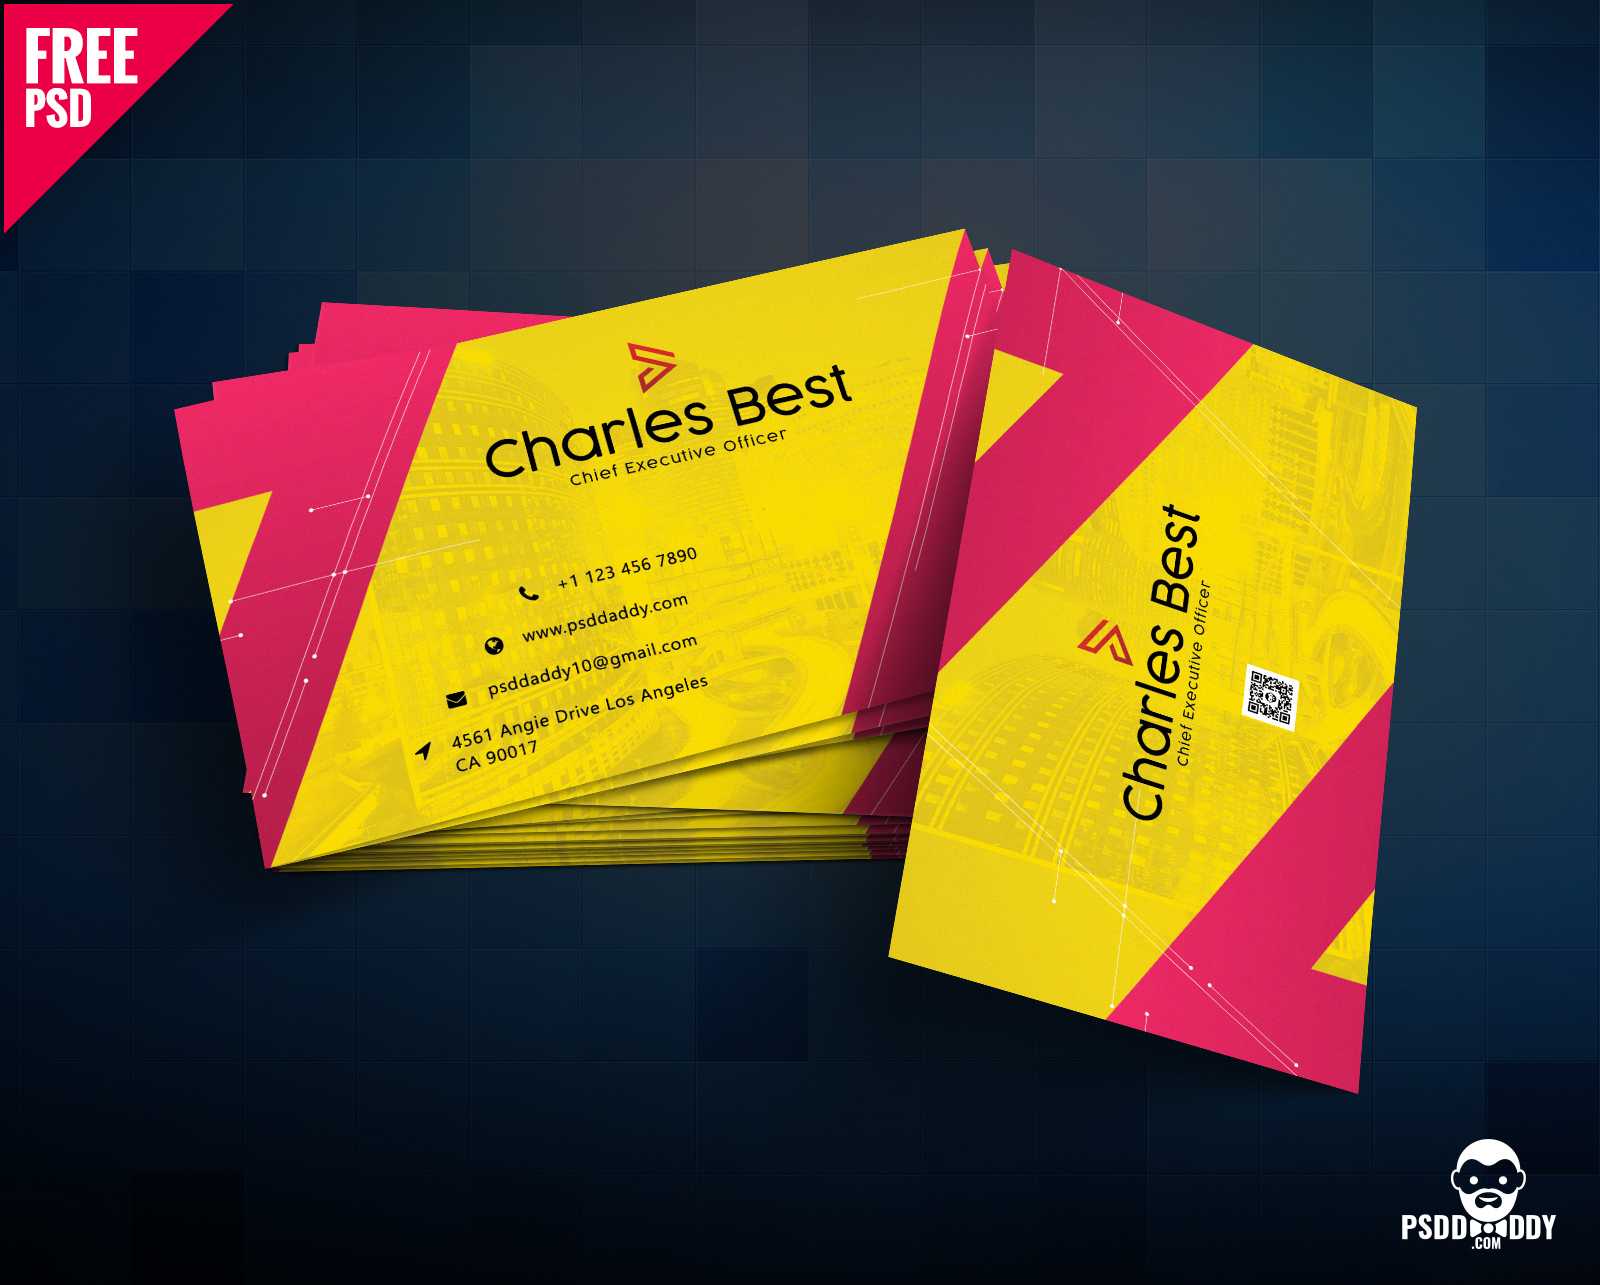 Download] Creative Business Card Free Psd | Psddaddy Within Name Card Design Template Psd